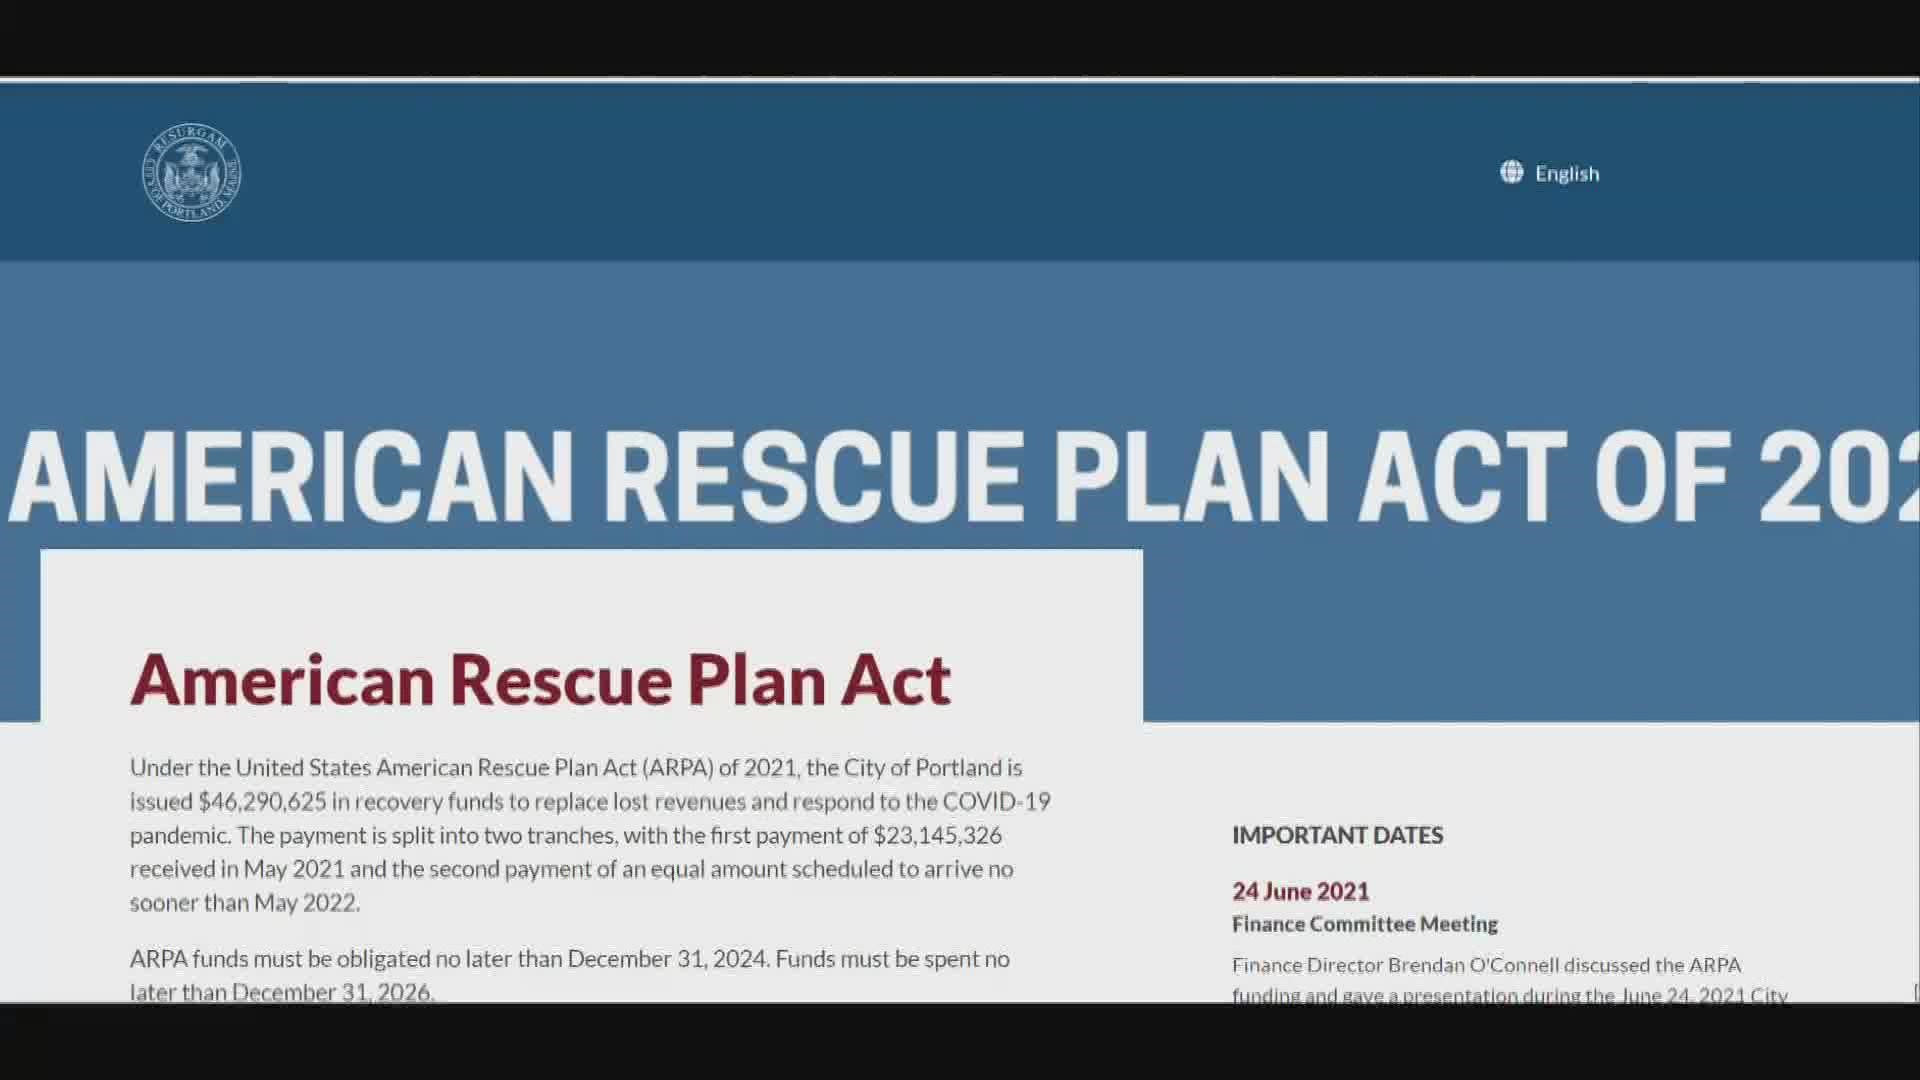 The city of Portland is asking community members to fill out a survey online about the use of almost $15 million in American Rescue Plan Act recovery funds.